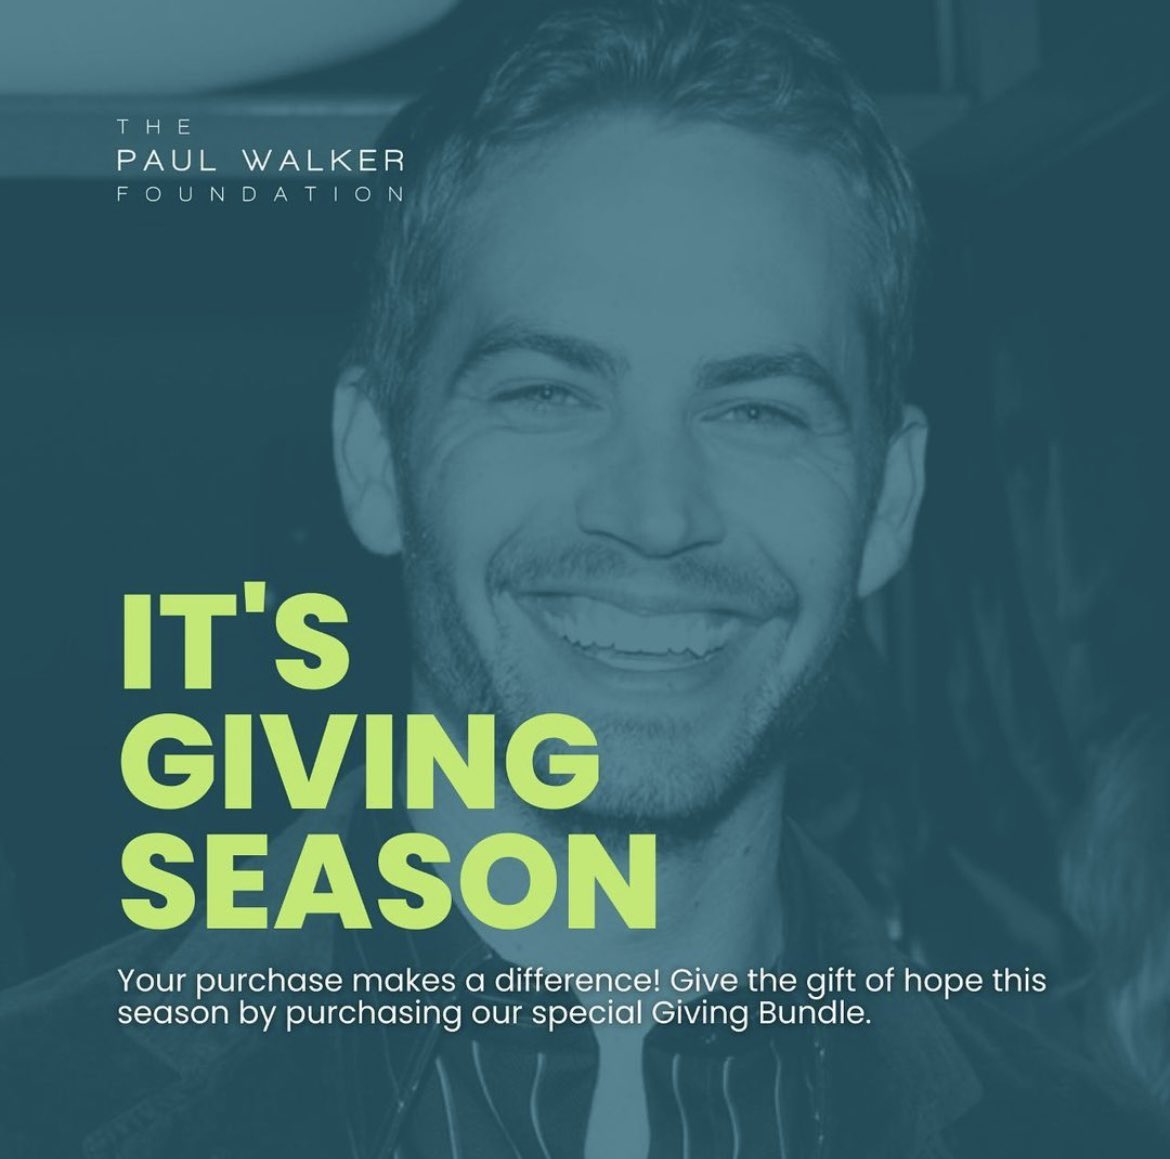 Happy #GivingTuesday everyone! 

In honor of today and it also being #ChadwickBoseman‘s birthday, check out the @bosemanfdn at  chadwickbosemanfoundation.org. #thecbfa 

You can also support the @paulwalkerfdn at paulwalkerfoundation.org. #PaulWalker 

#GivingSeason